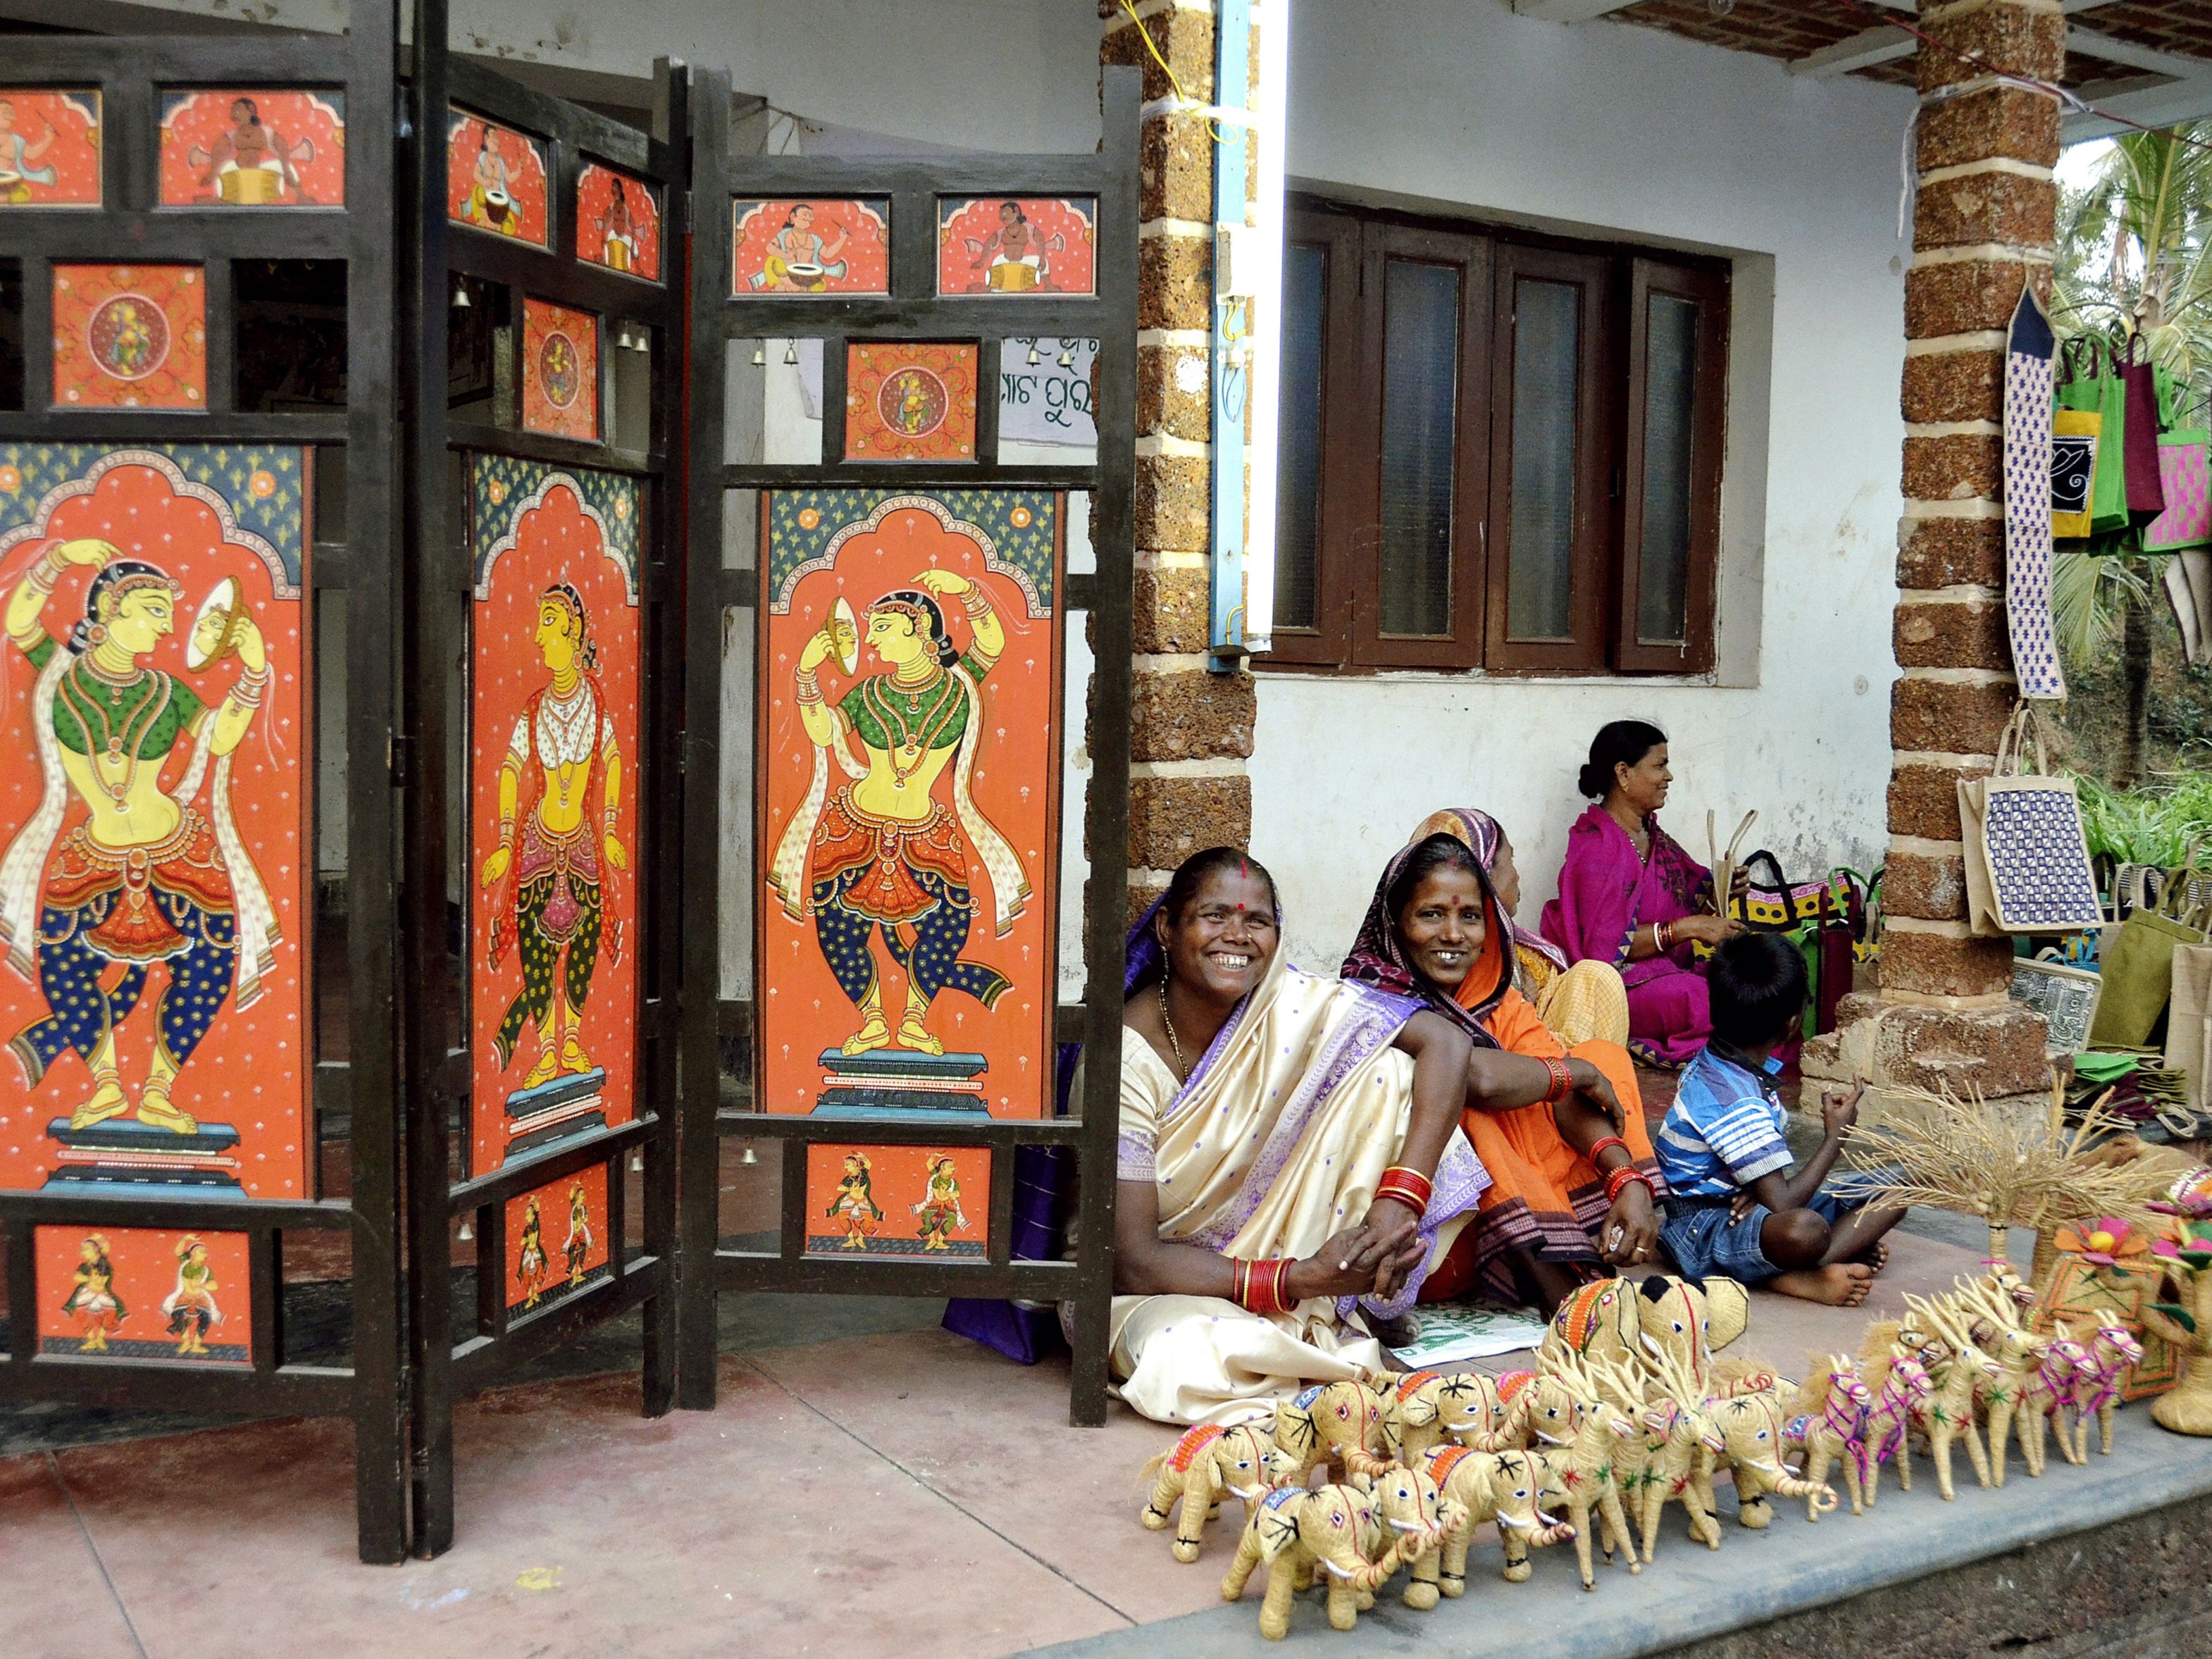 Online exhibition 'Crafted in India' to showcase handicraft heritage